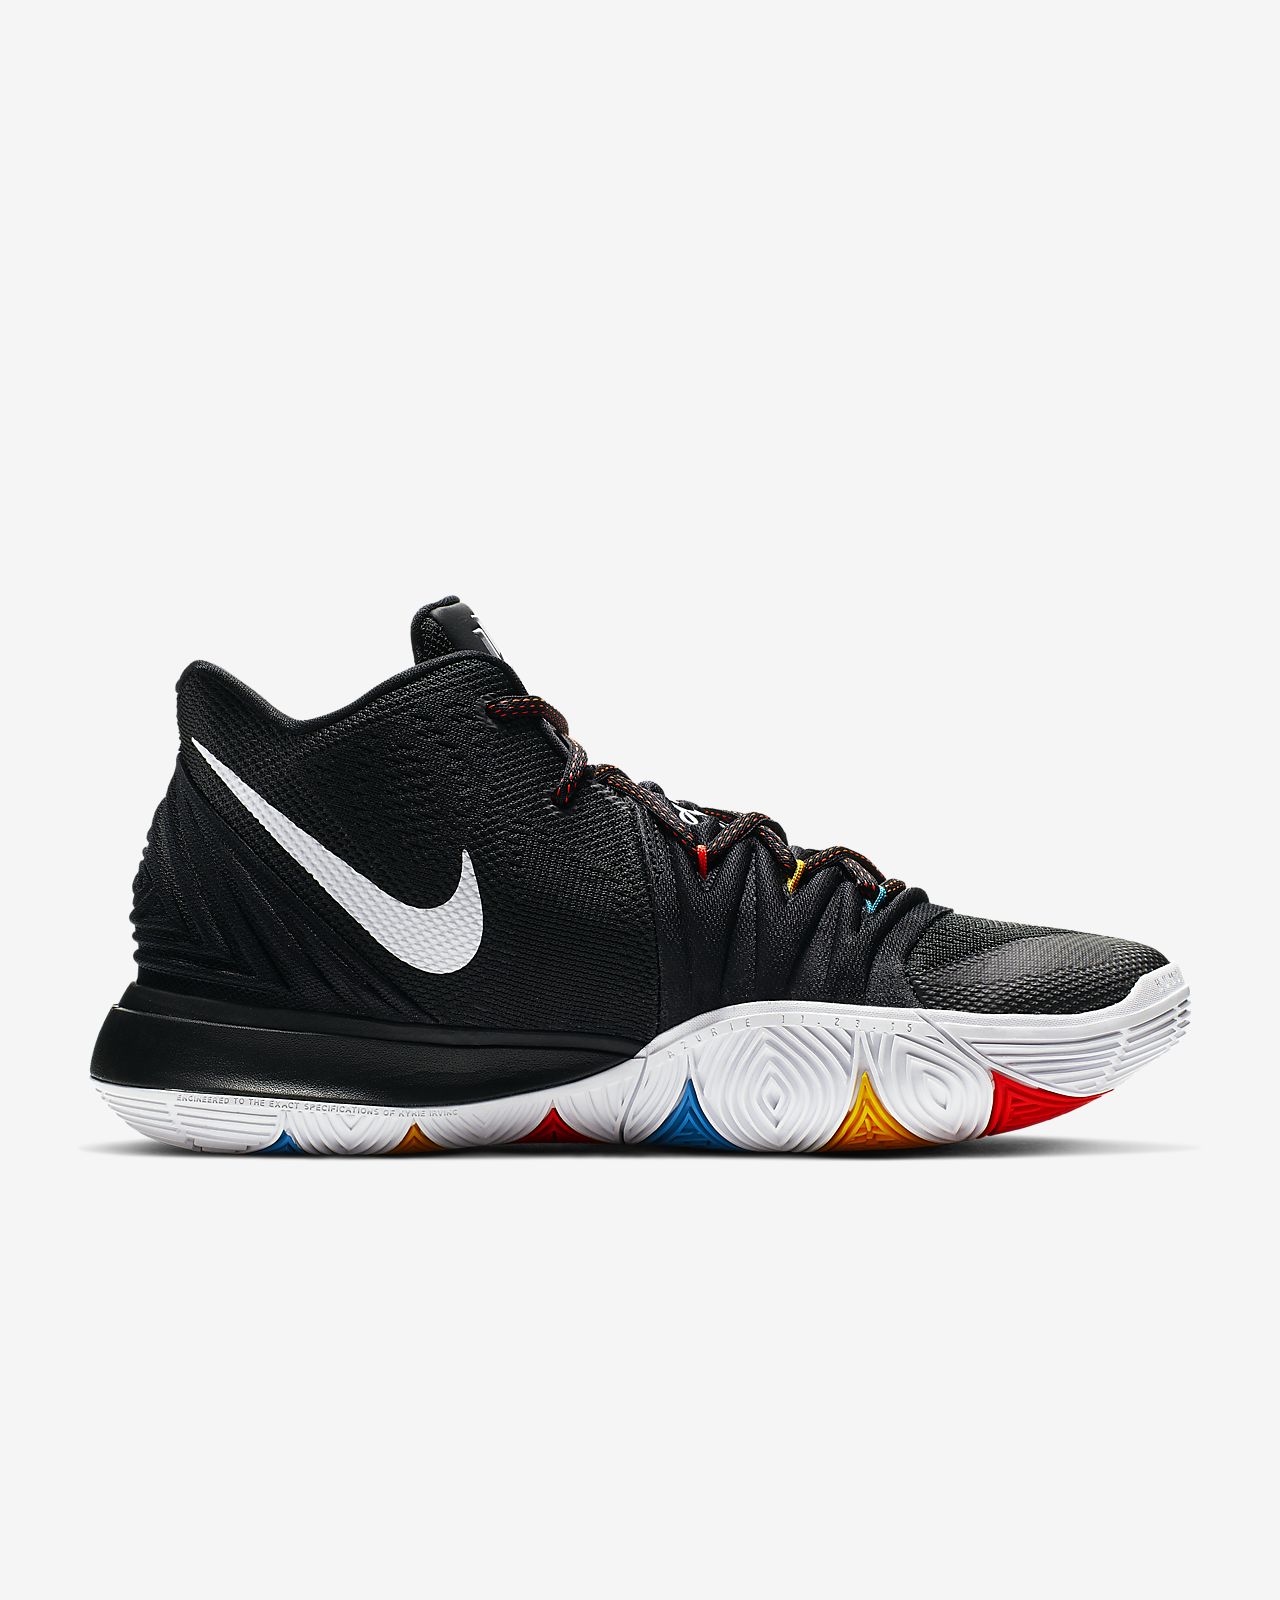 kyrie 5 in store